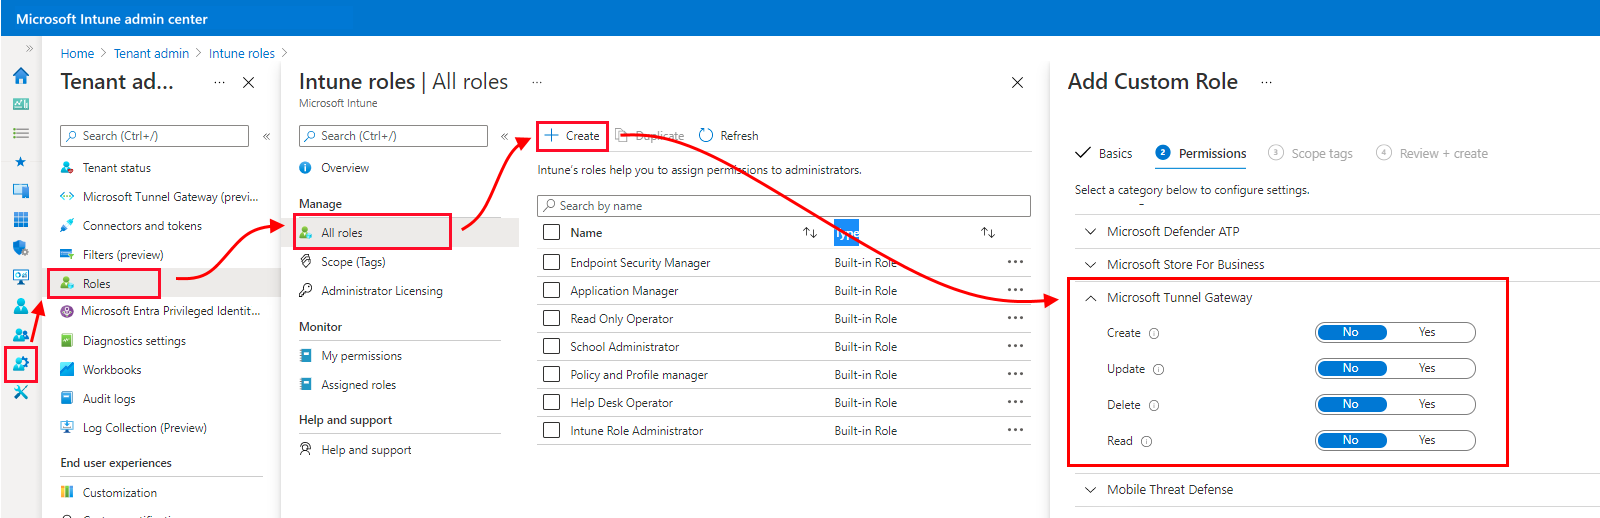 Screen shot of the tunnel gateway permissions in the Microsoft Endpoint Manager admin center.